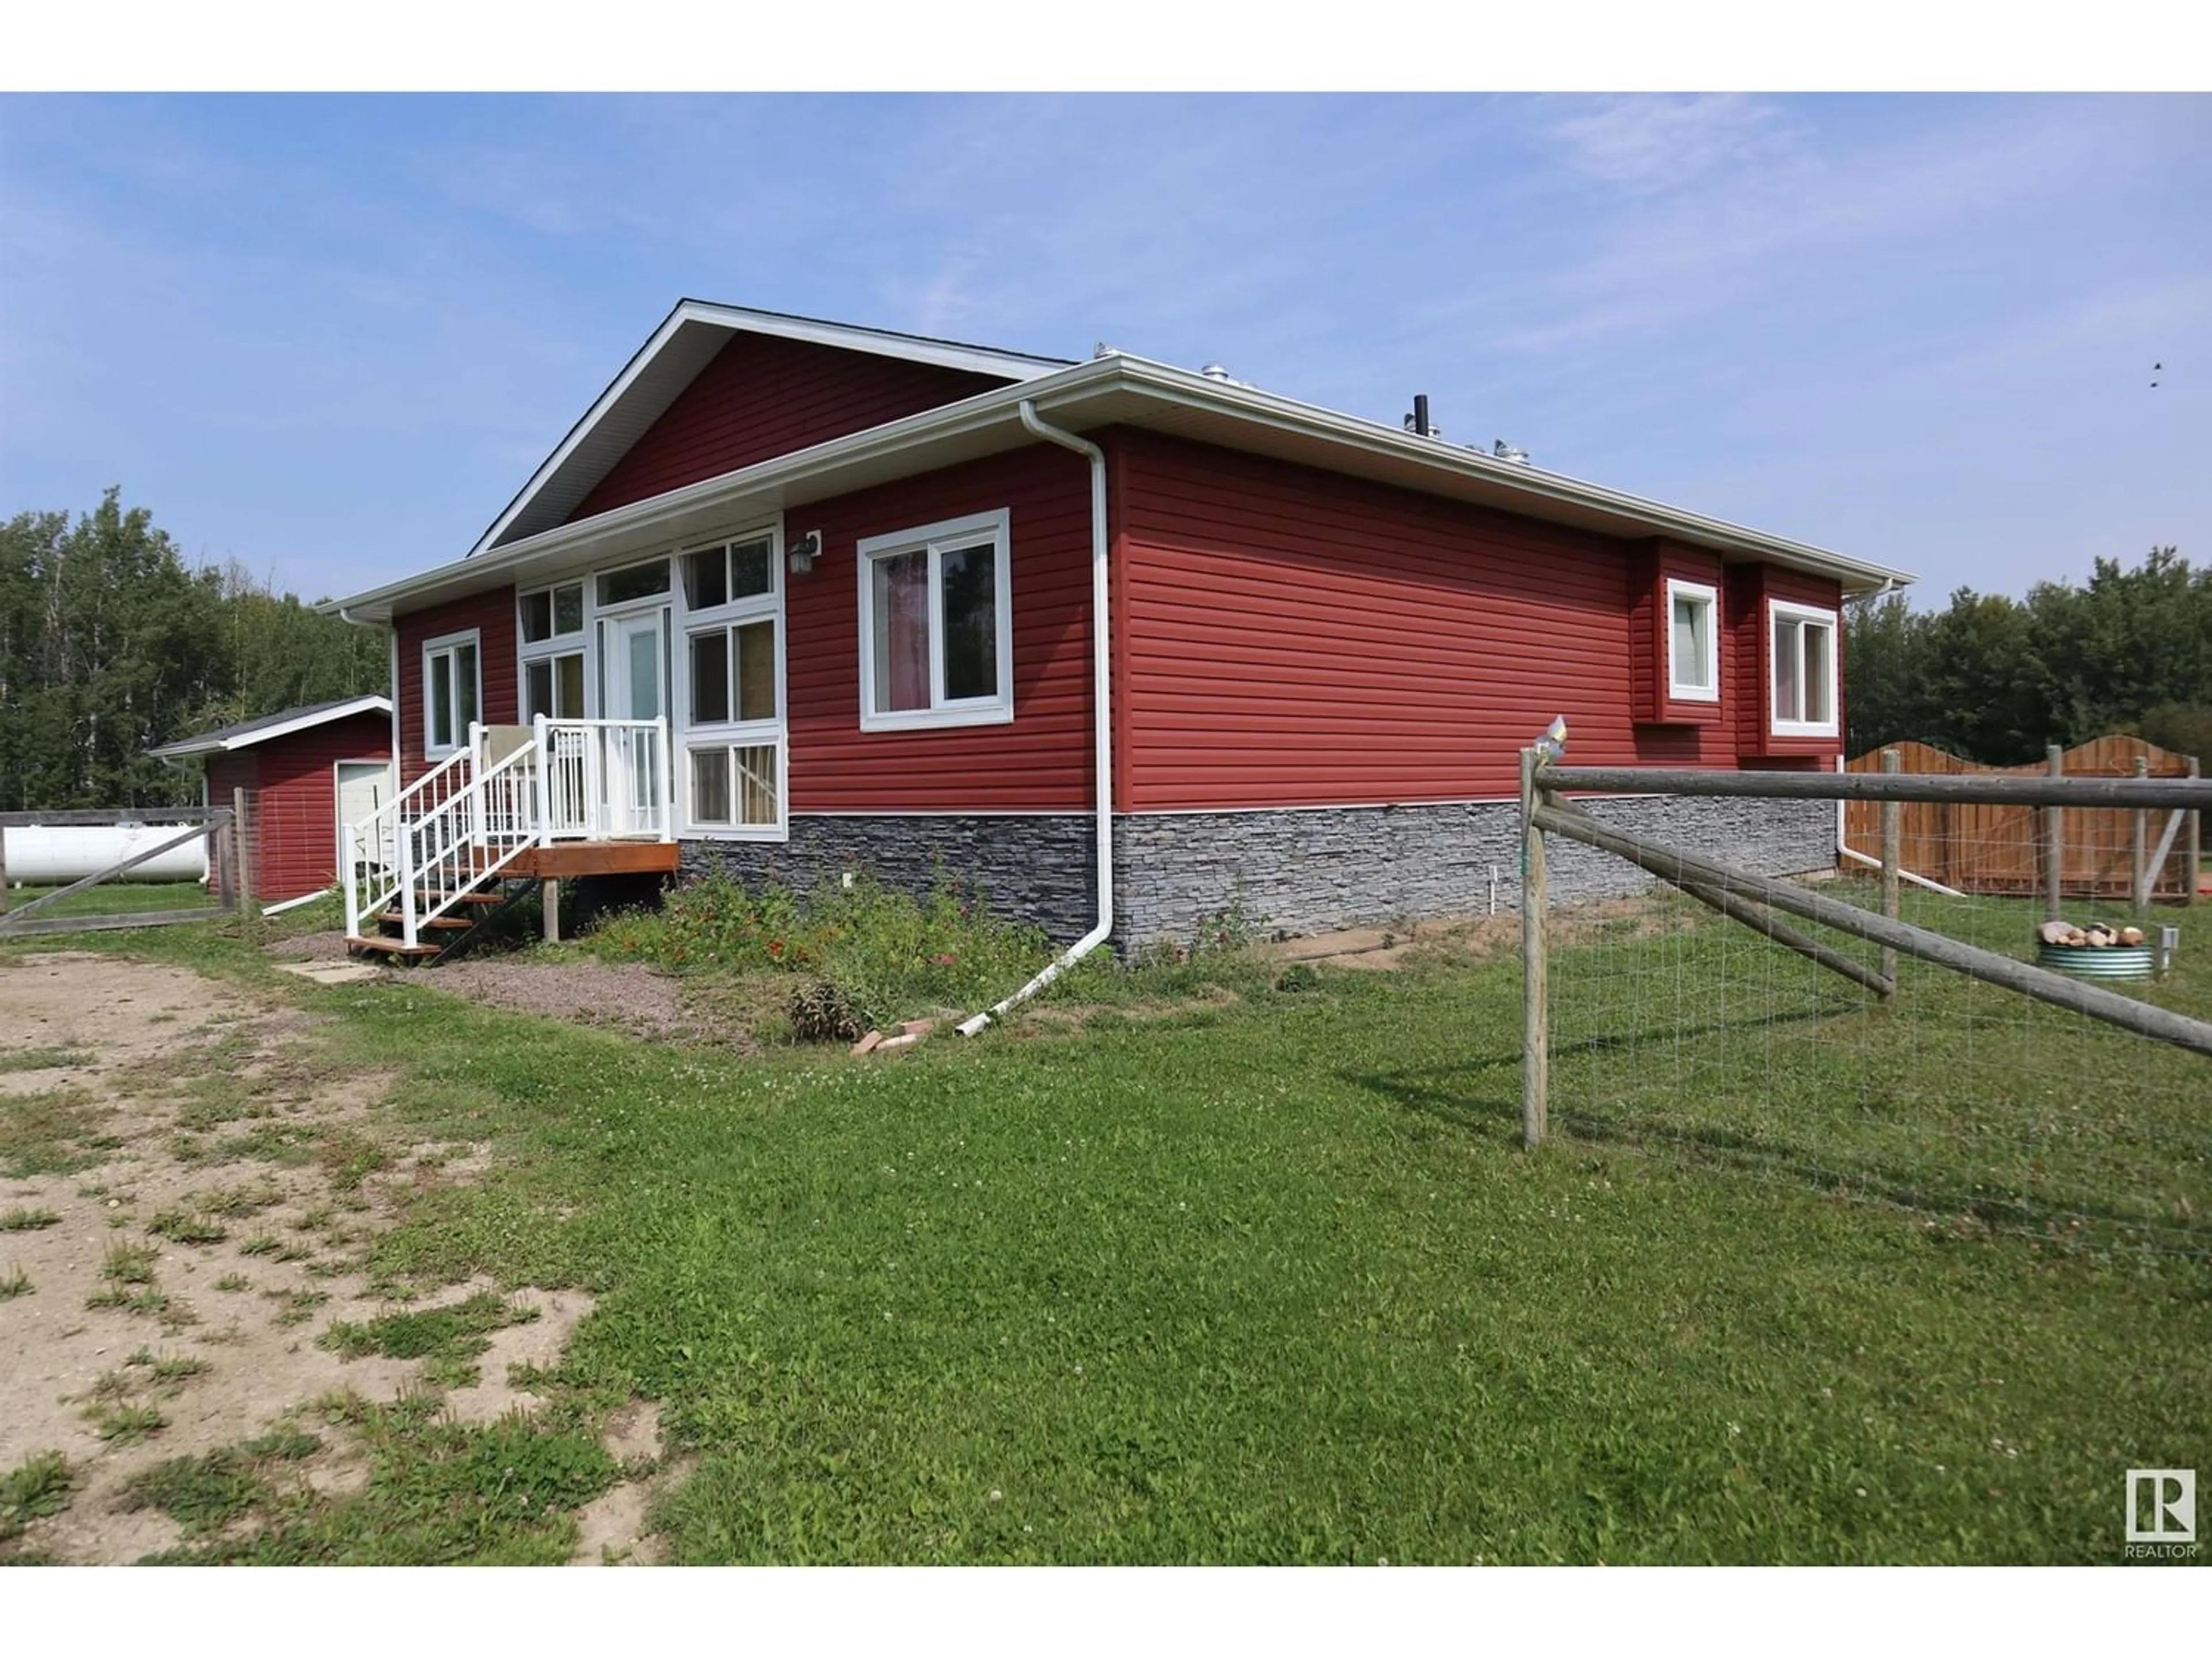 Frontside or backside of a home for 15070 HWY 771, Rural Wetaskiwin County Alberta T0C2V0